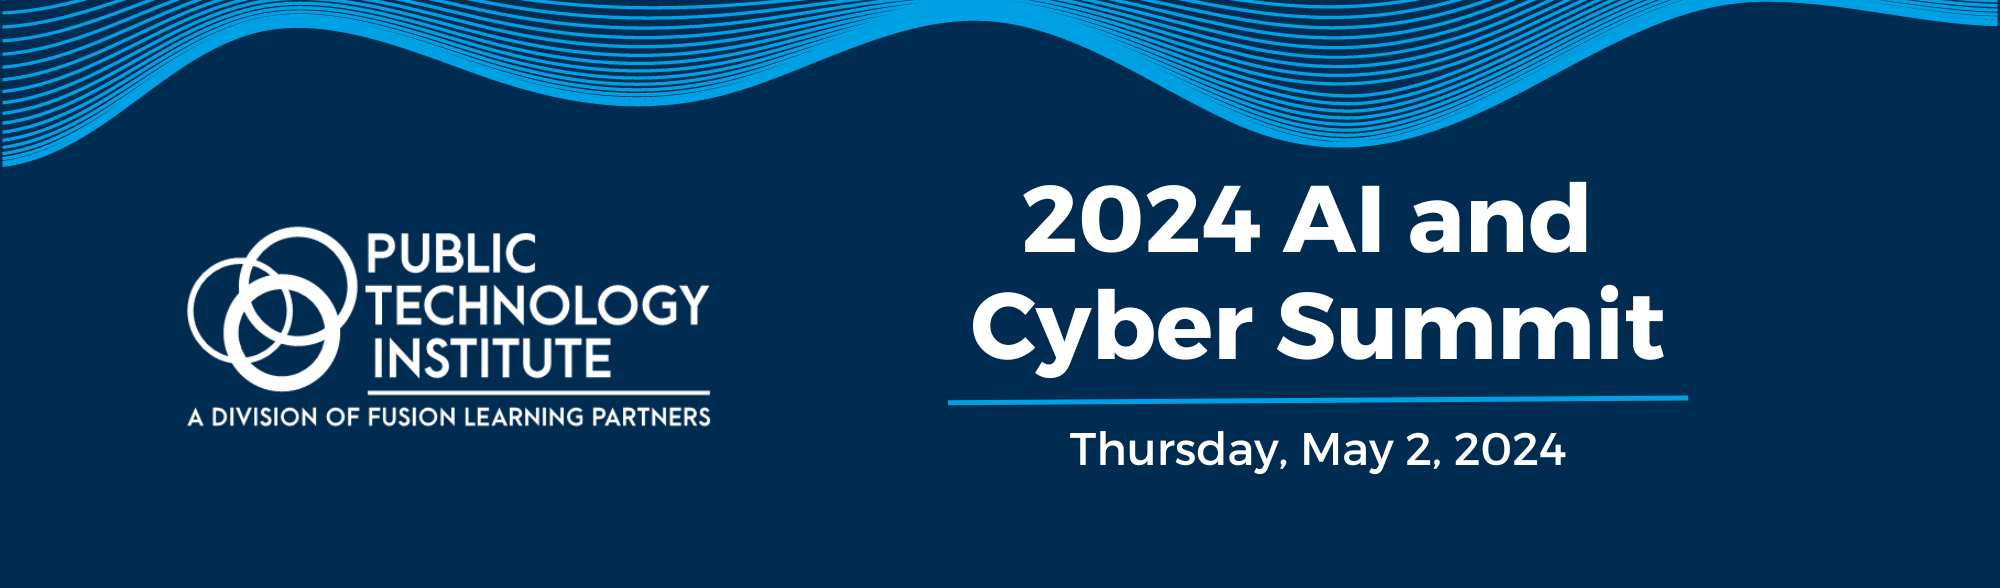 2024 AI and Cyber Summit Web Banner